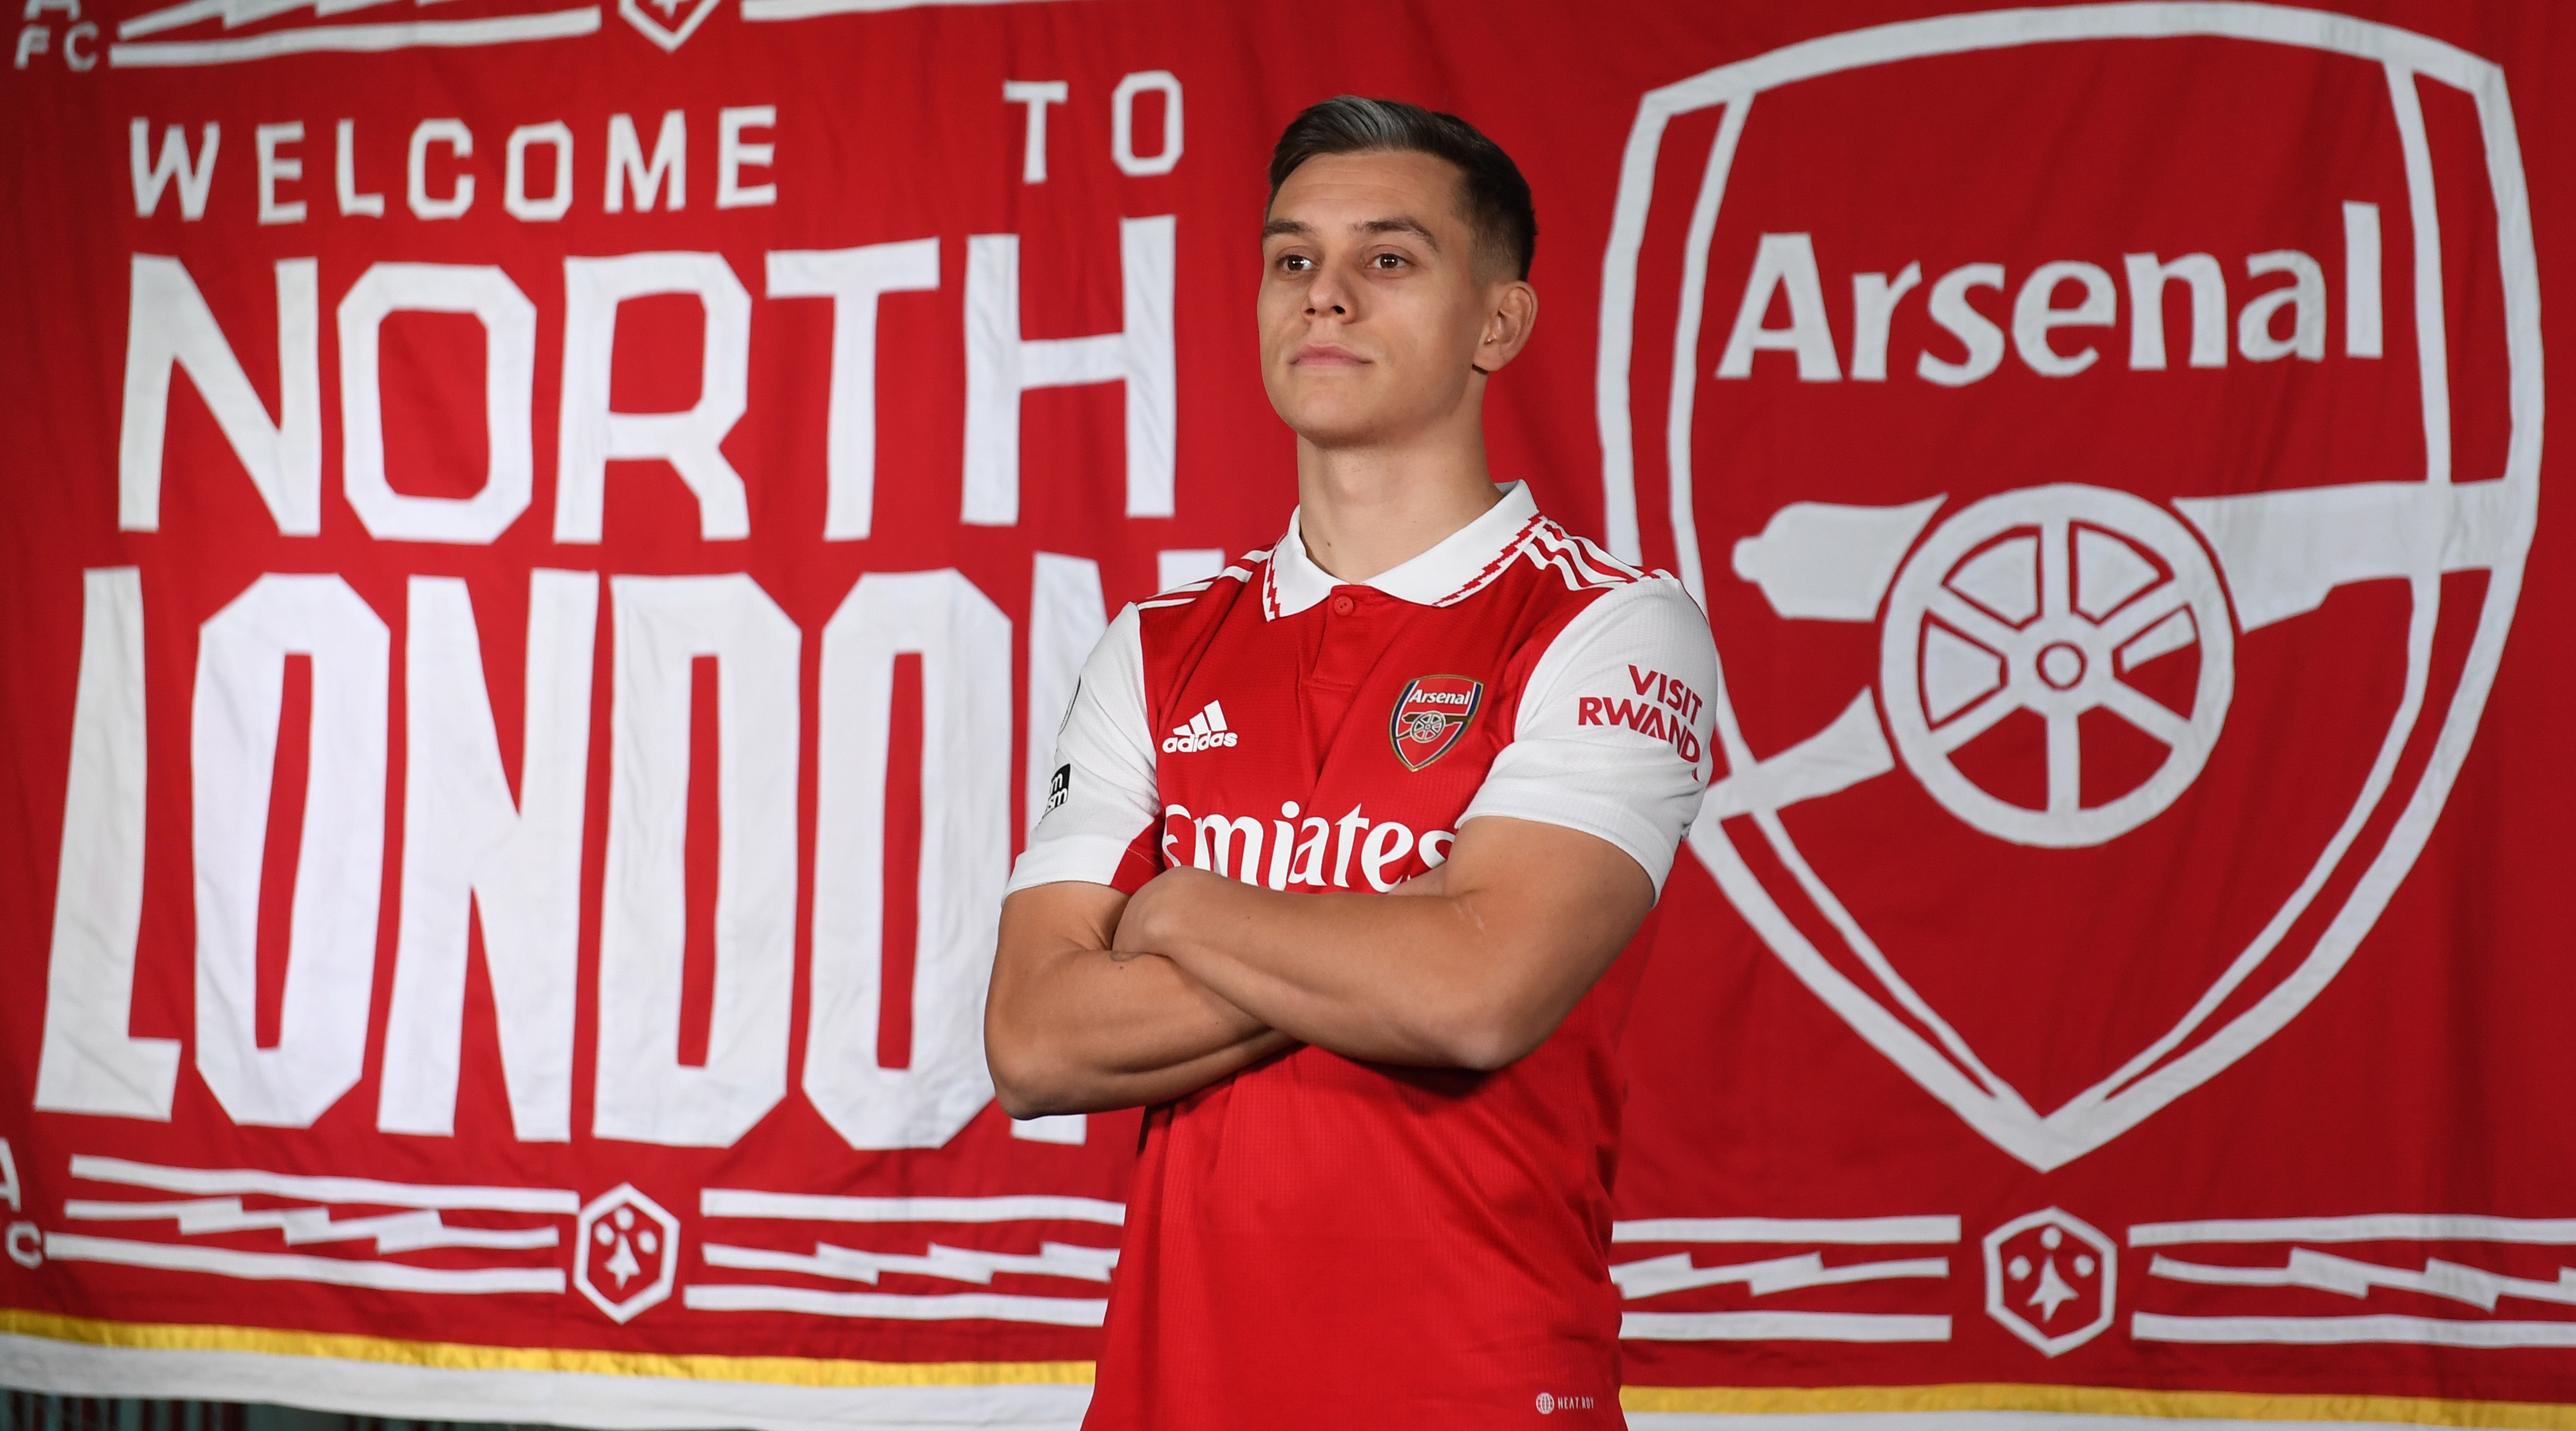 Leandro Trossard is unveiled after signing for Arsenal on 20 January, 2023.